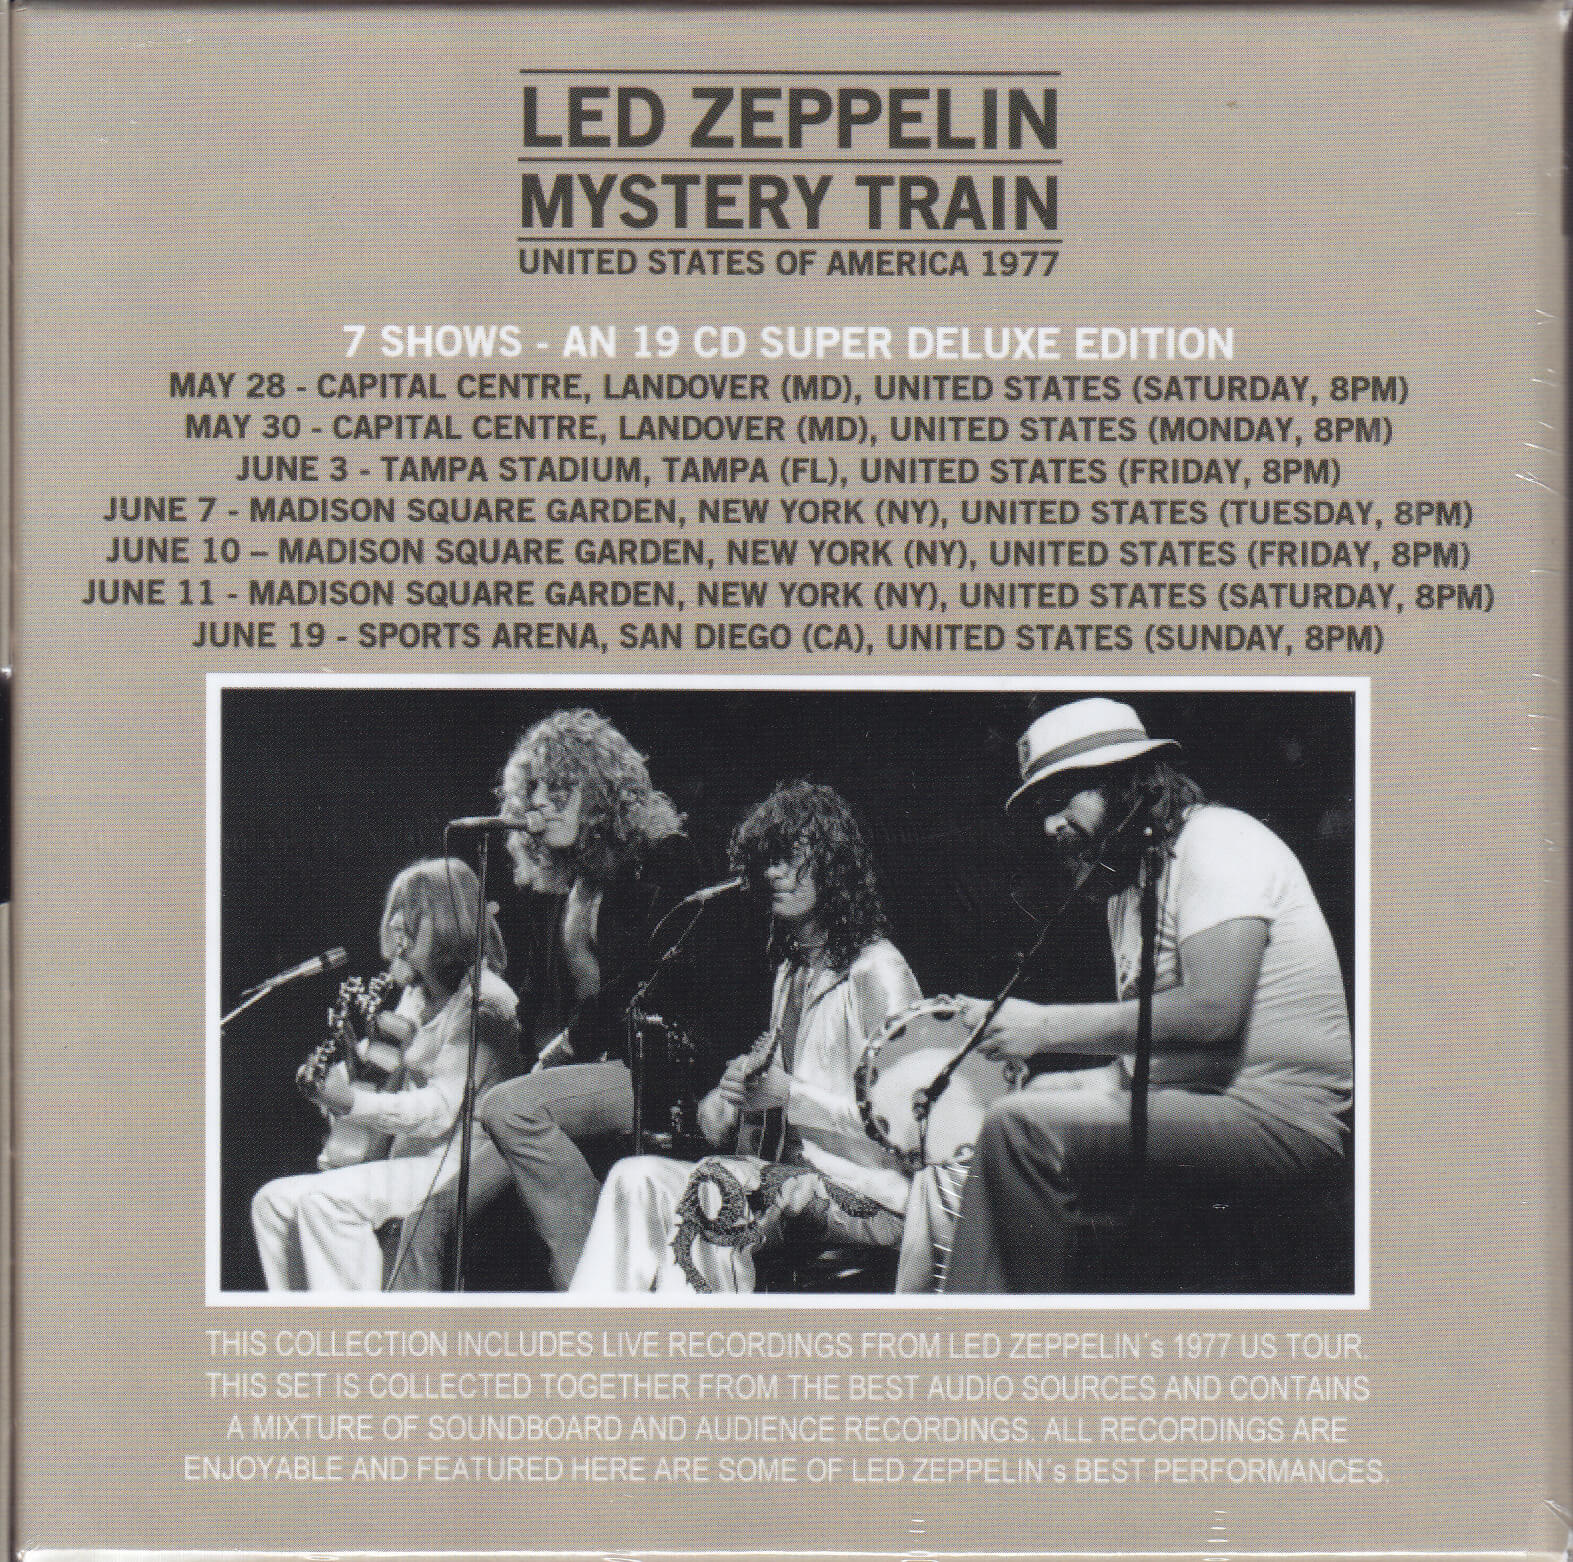 Led Zeppelin / Mystery Train United States Of America 1977 / 19CD 